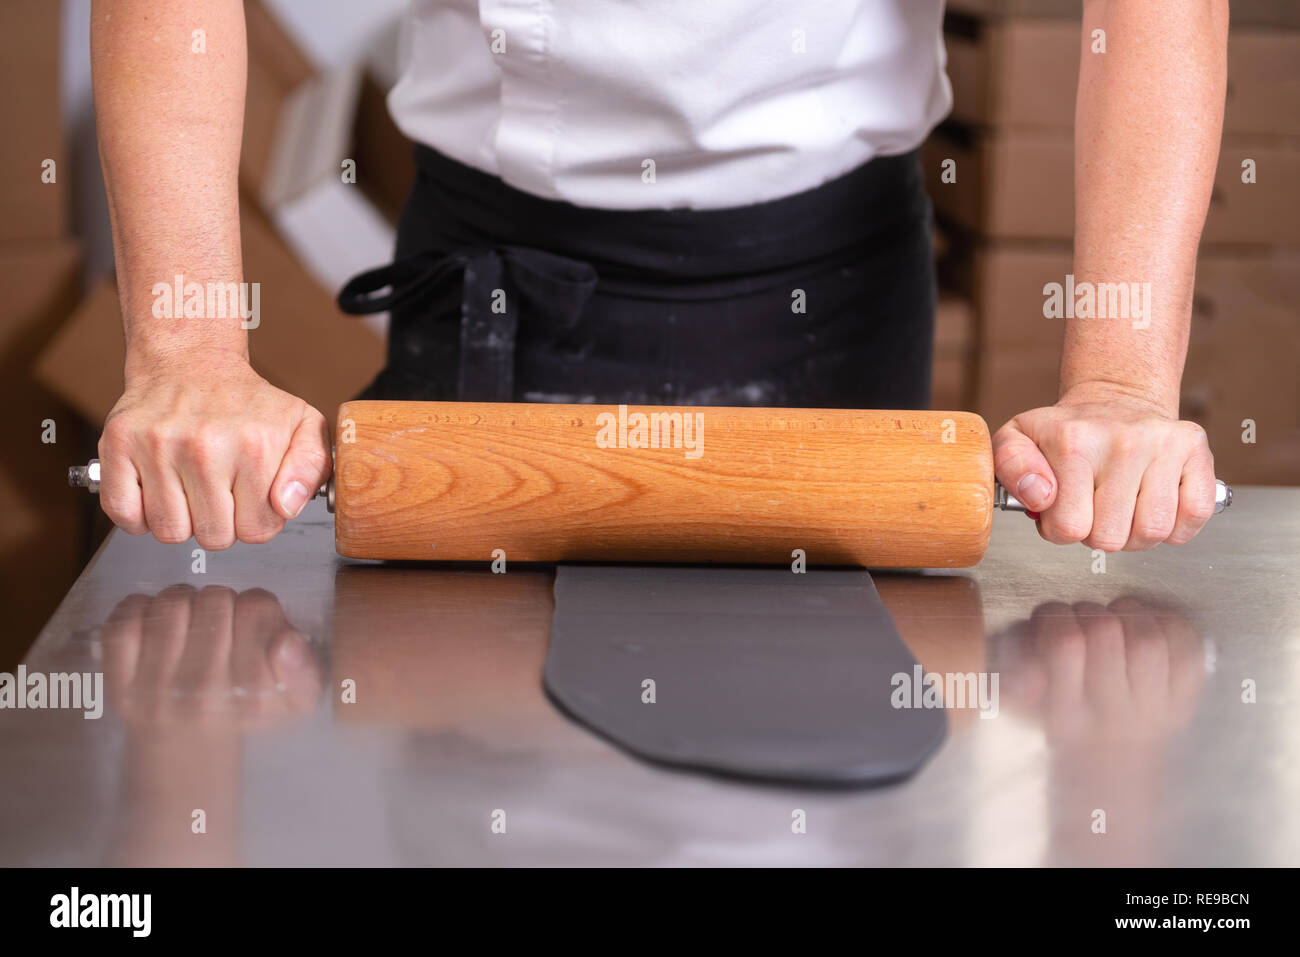 Confectioner using rolling pin preparing fondant for cake decorating . Stock Photo